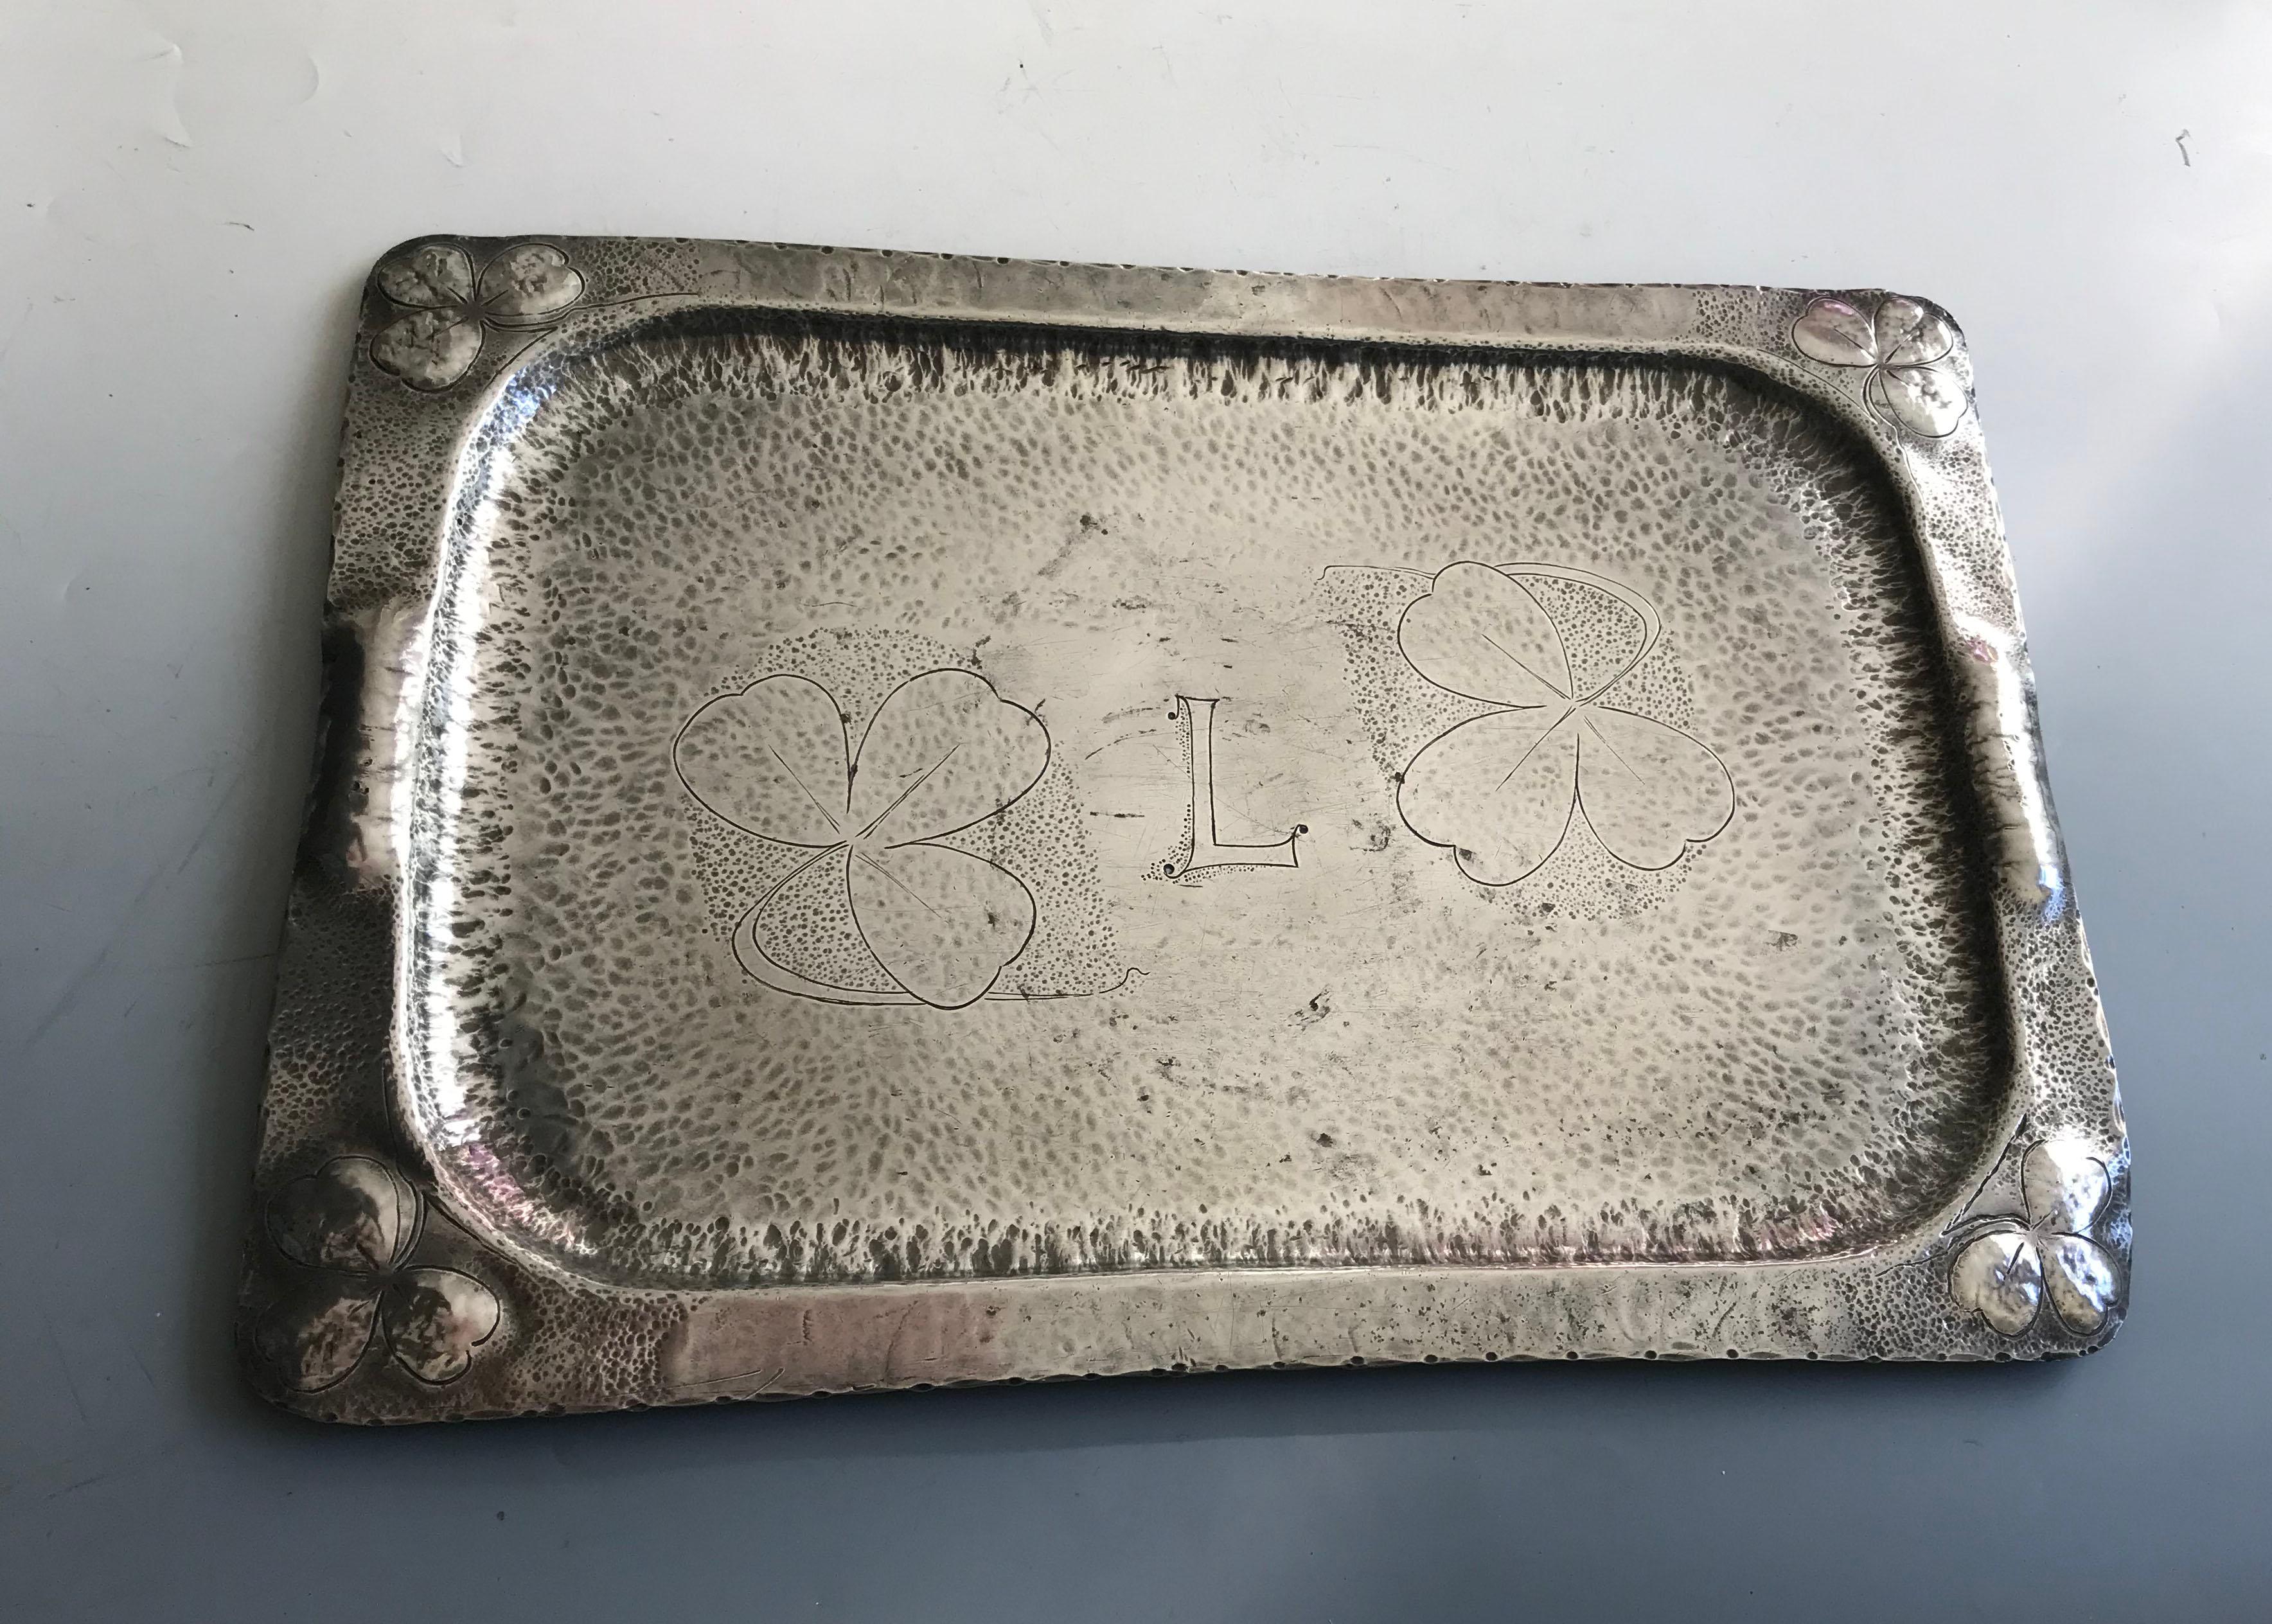 Irish Arts & crafts Folk Art Pewter Shamrock design tray
A Fine Irish Arts and crafts serving tray with hammered and chased 
shamrock designs 
Rare One of a kind piece
Period 1930`s A scarce piece : Maker Unknown
Condition Fine
Size 20 x 14 inches